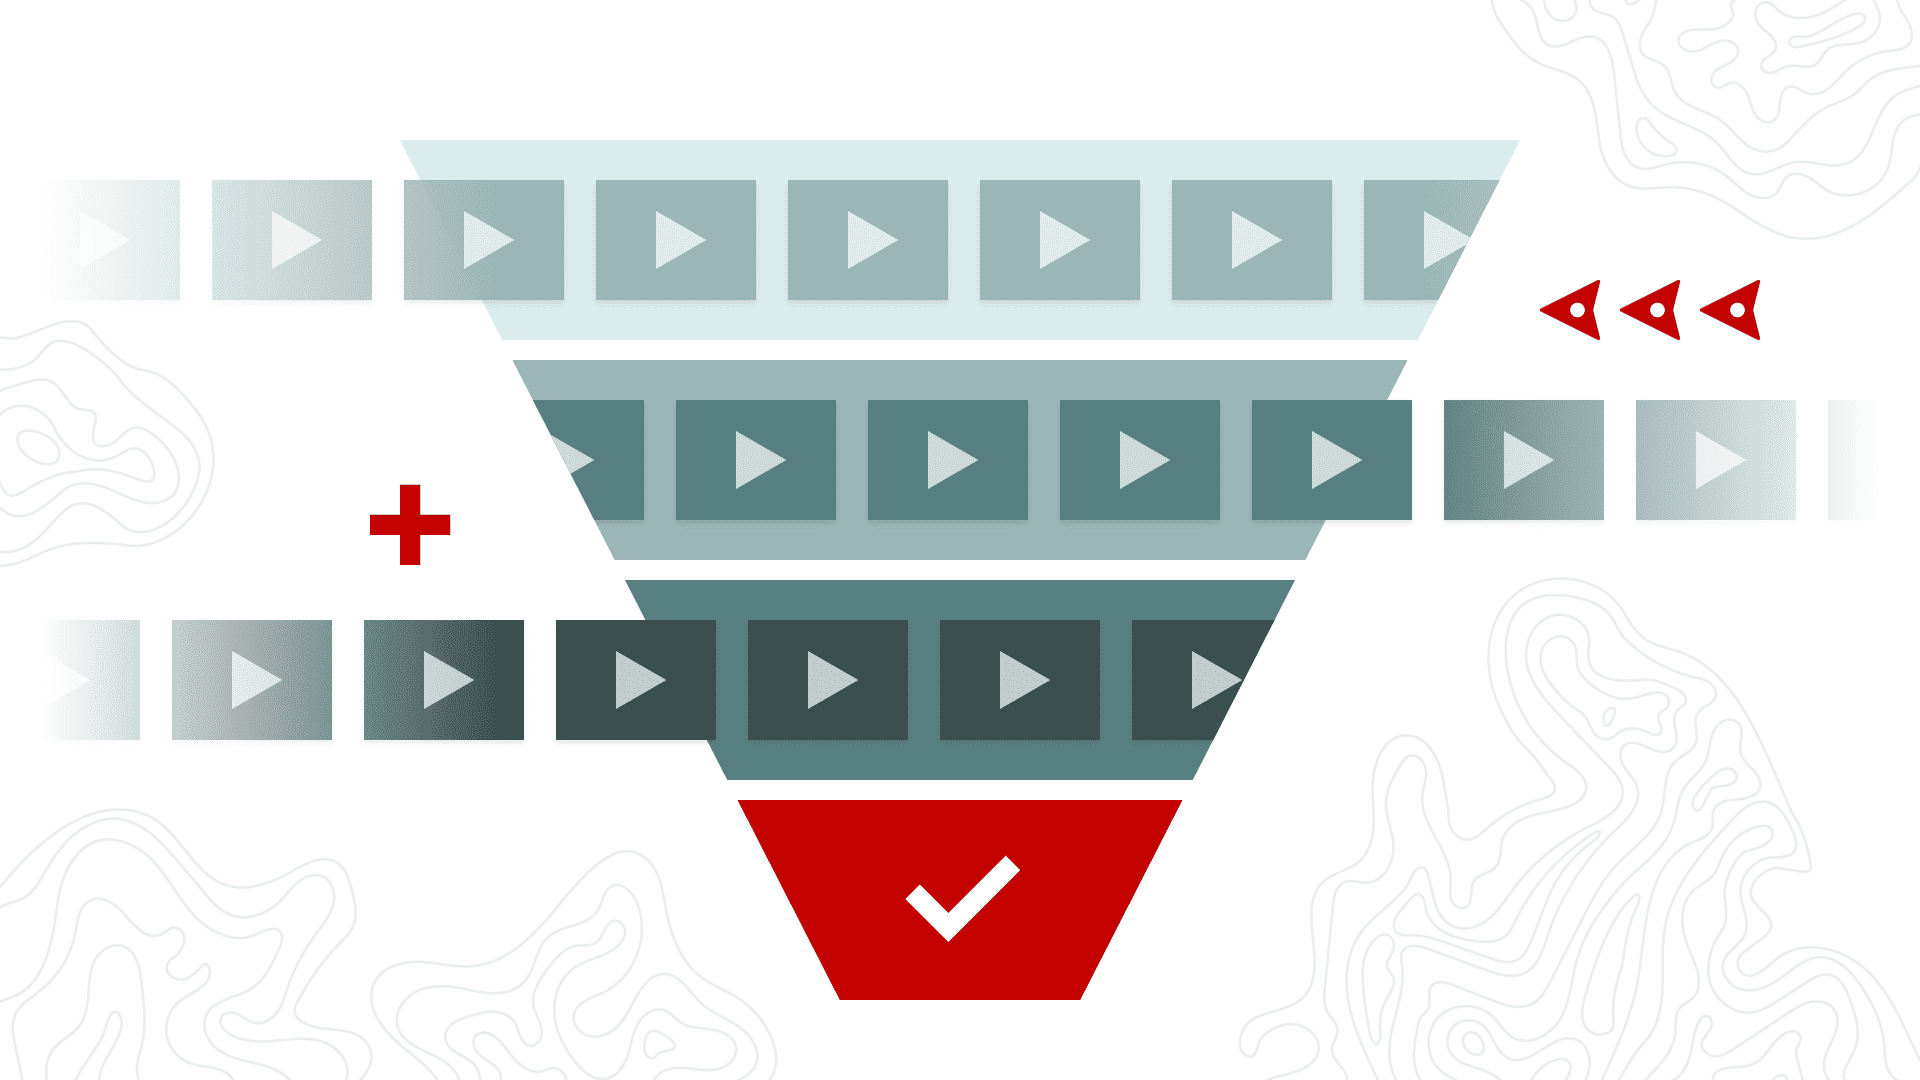 Video icons flowing down a funnel